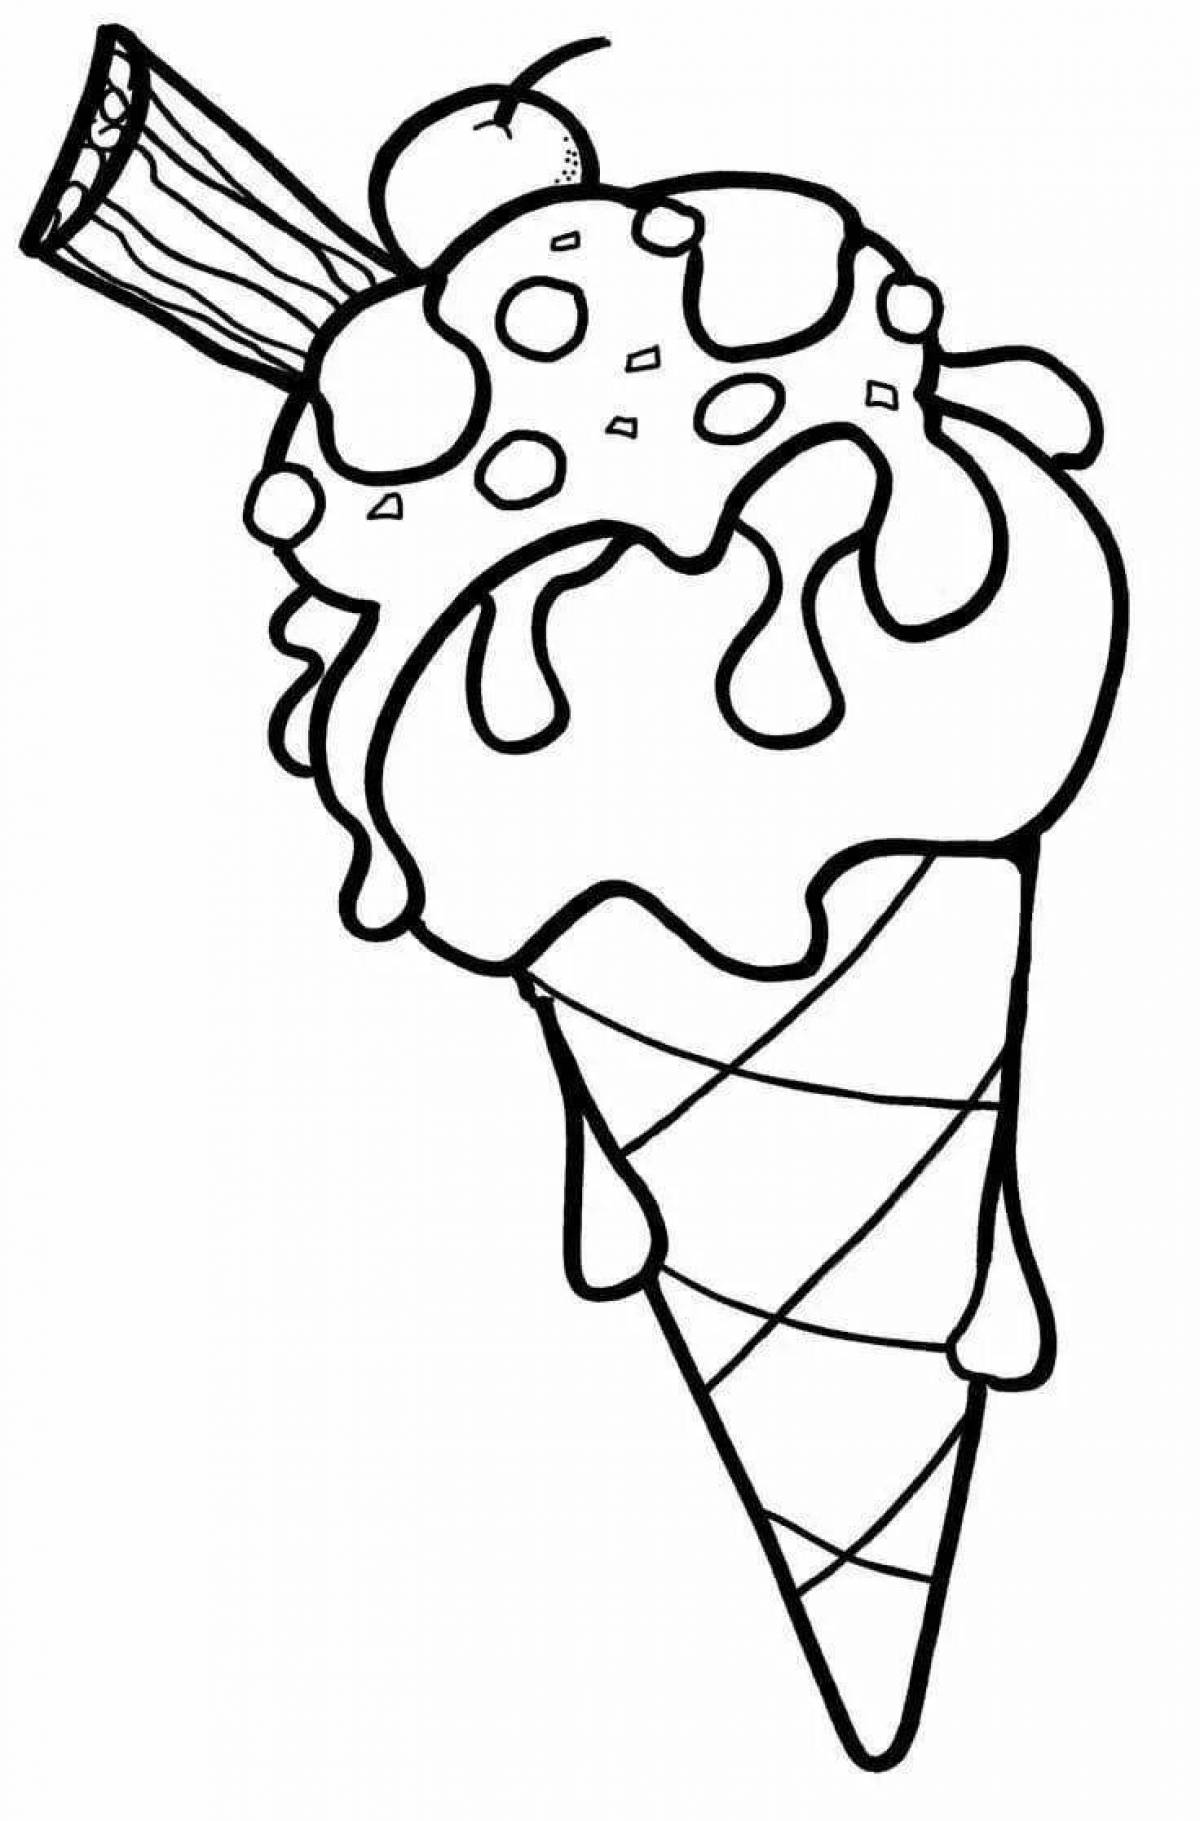 Playful ice cream coloring page for kids